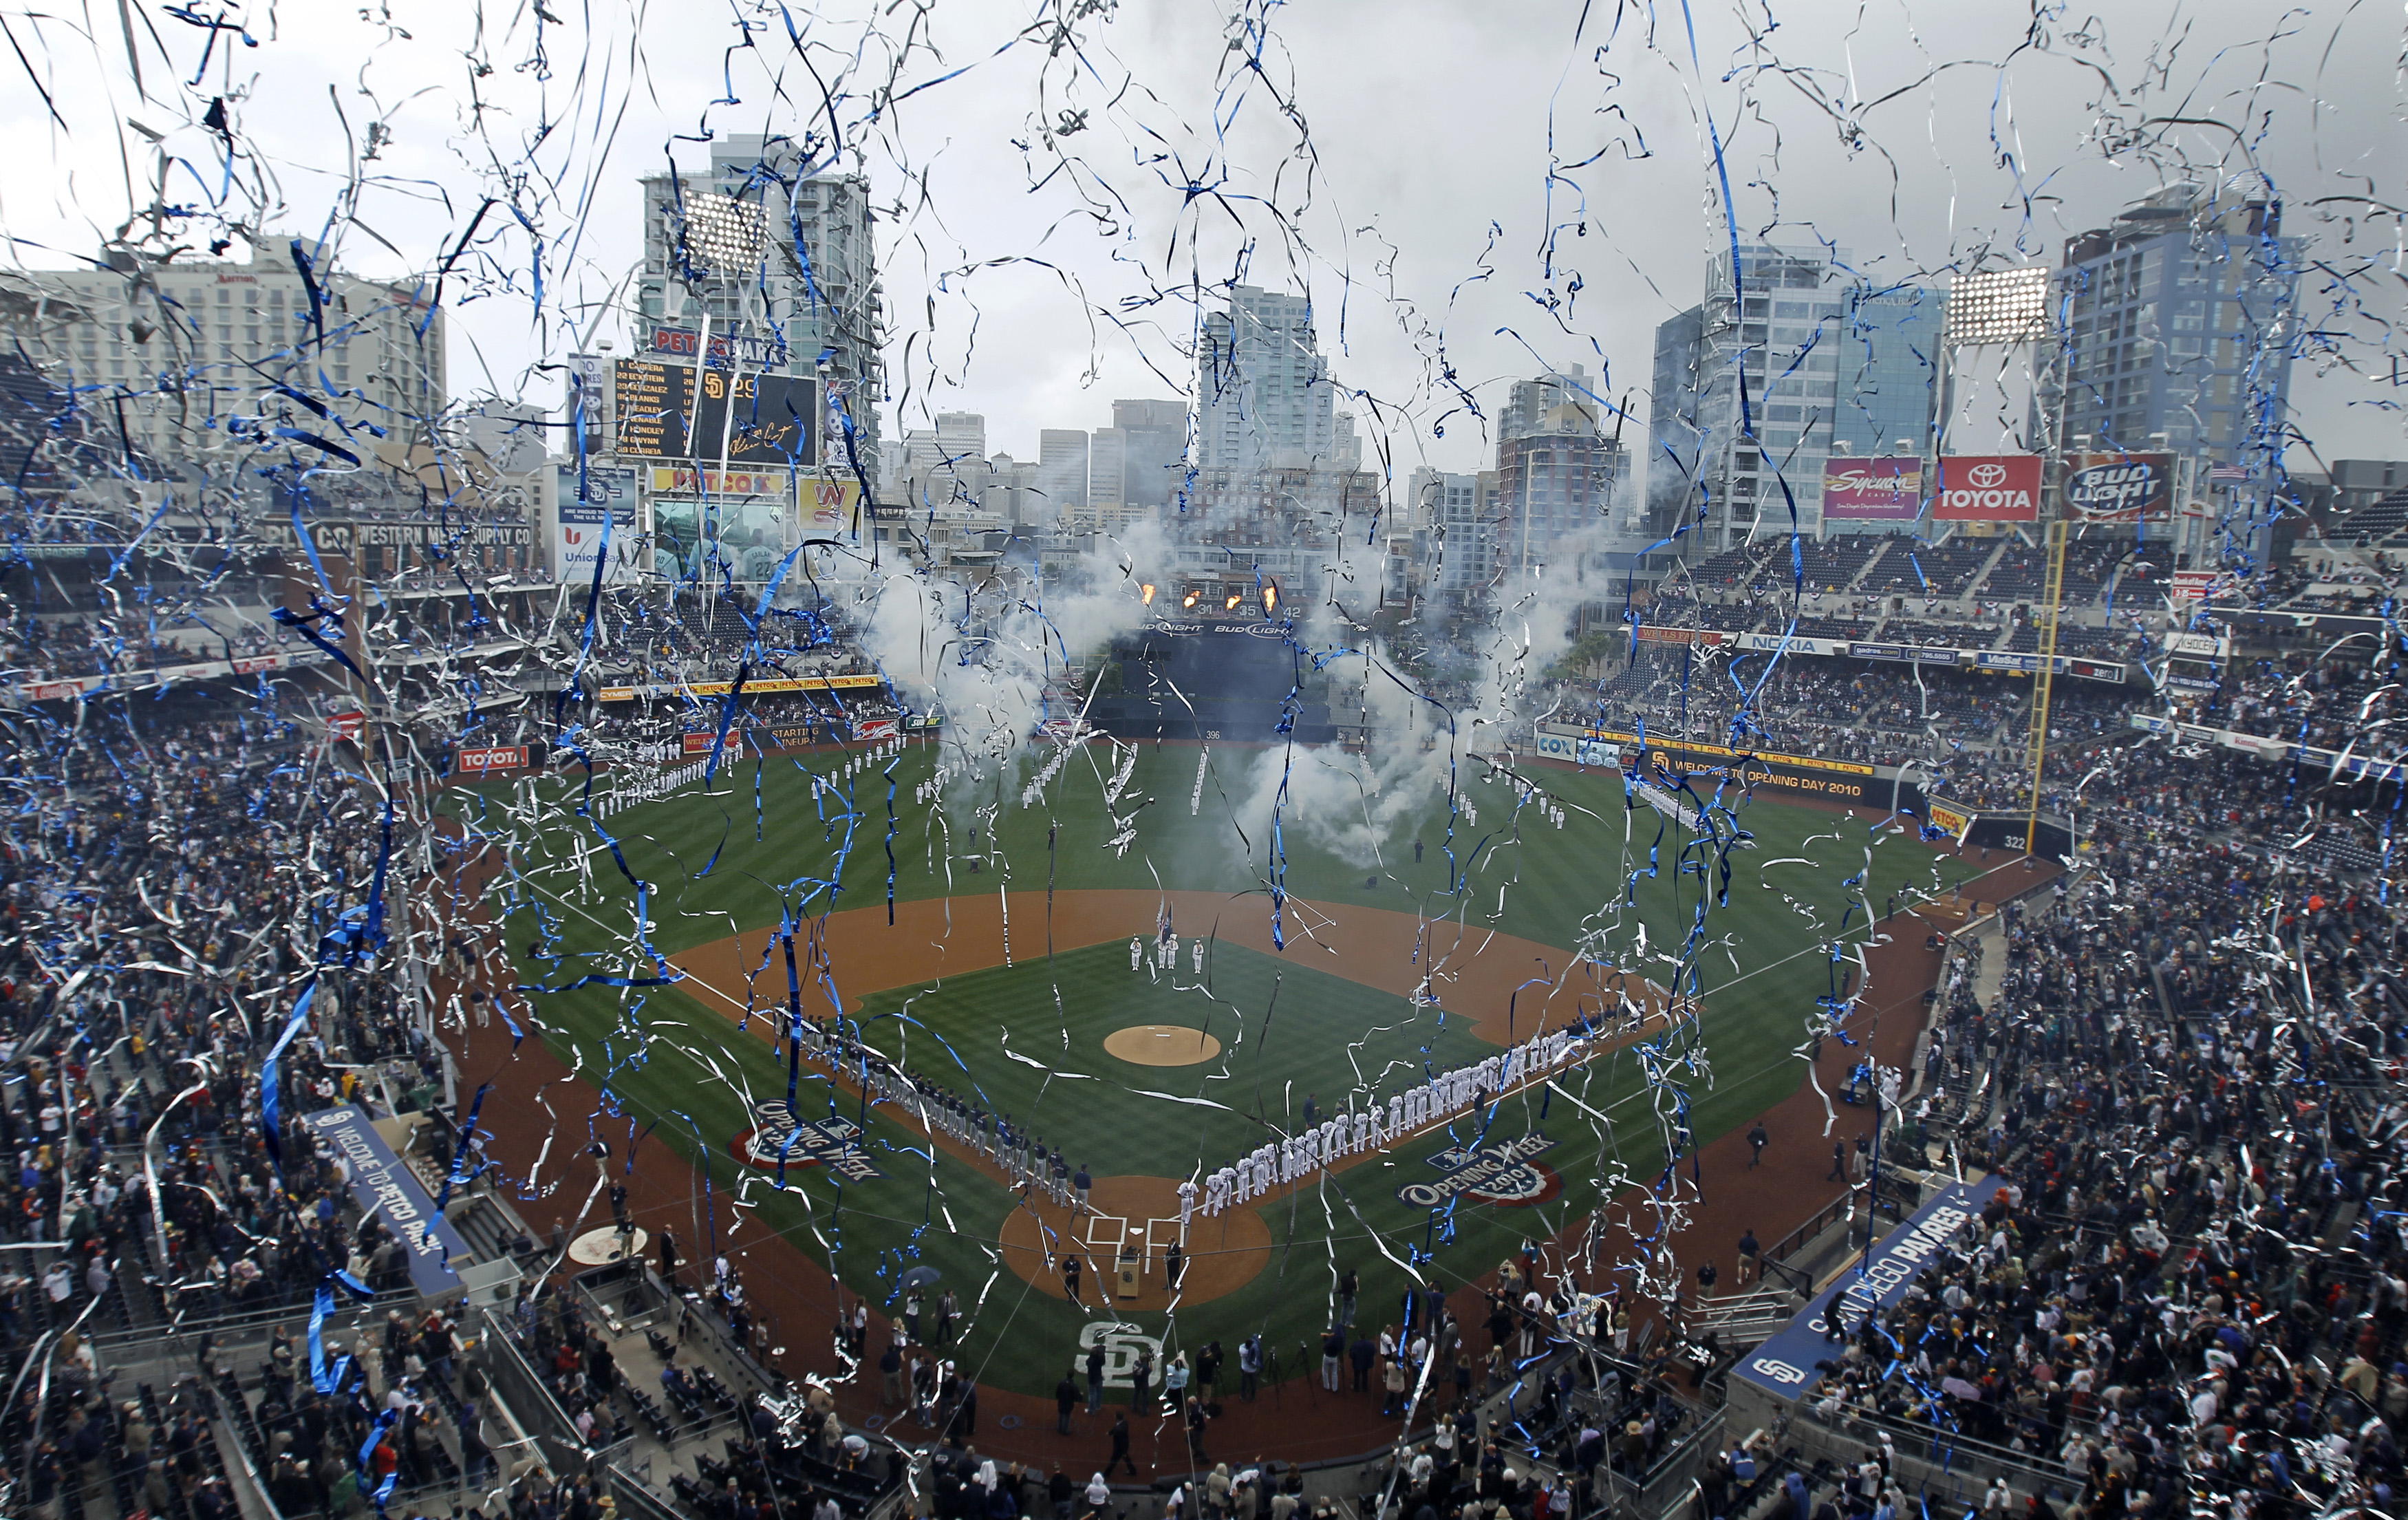 Baseball lifts San Diego's spirits. Can it revive a pandemic-stricken U.S.  economy?